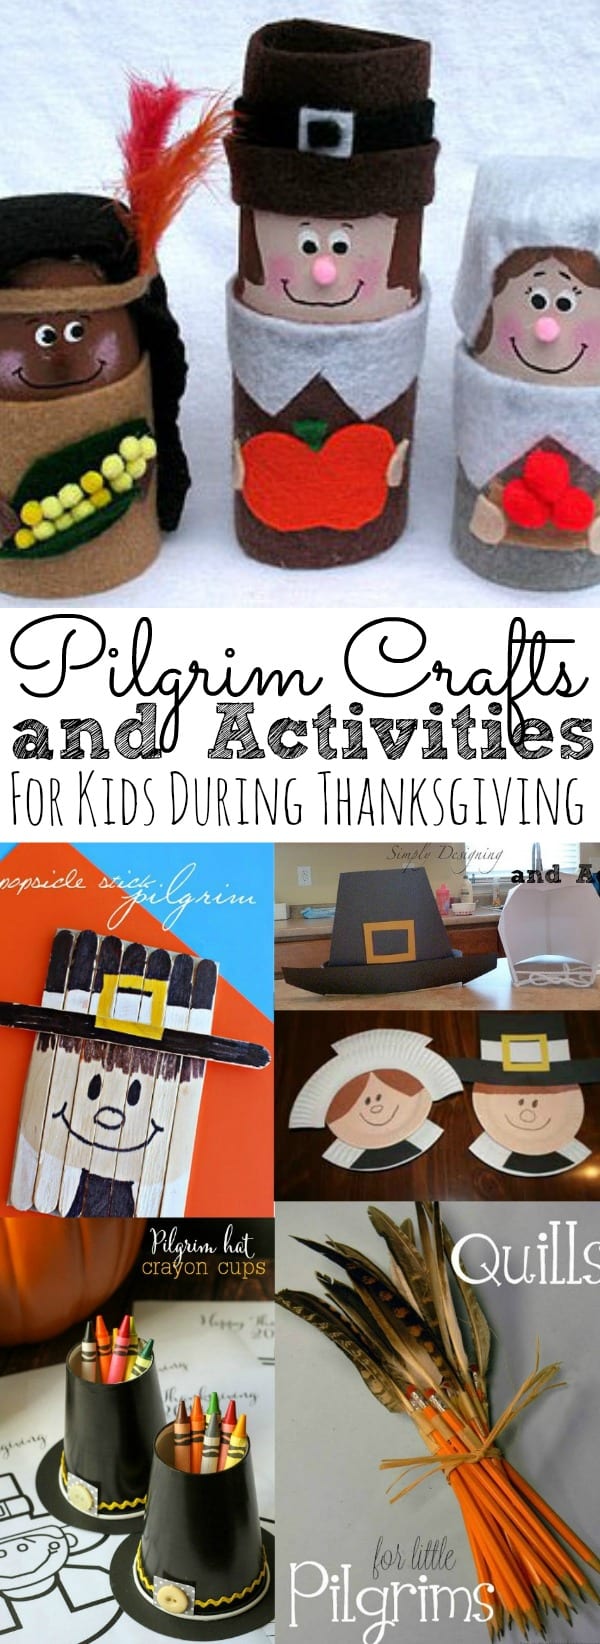 Pilgrim Crafts and Activities for Kids